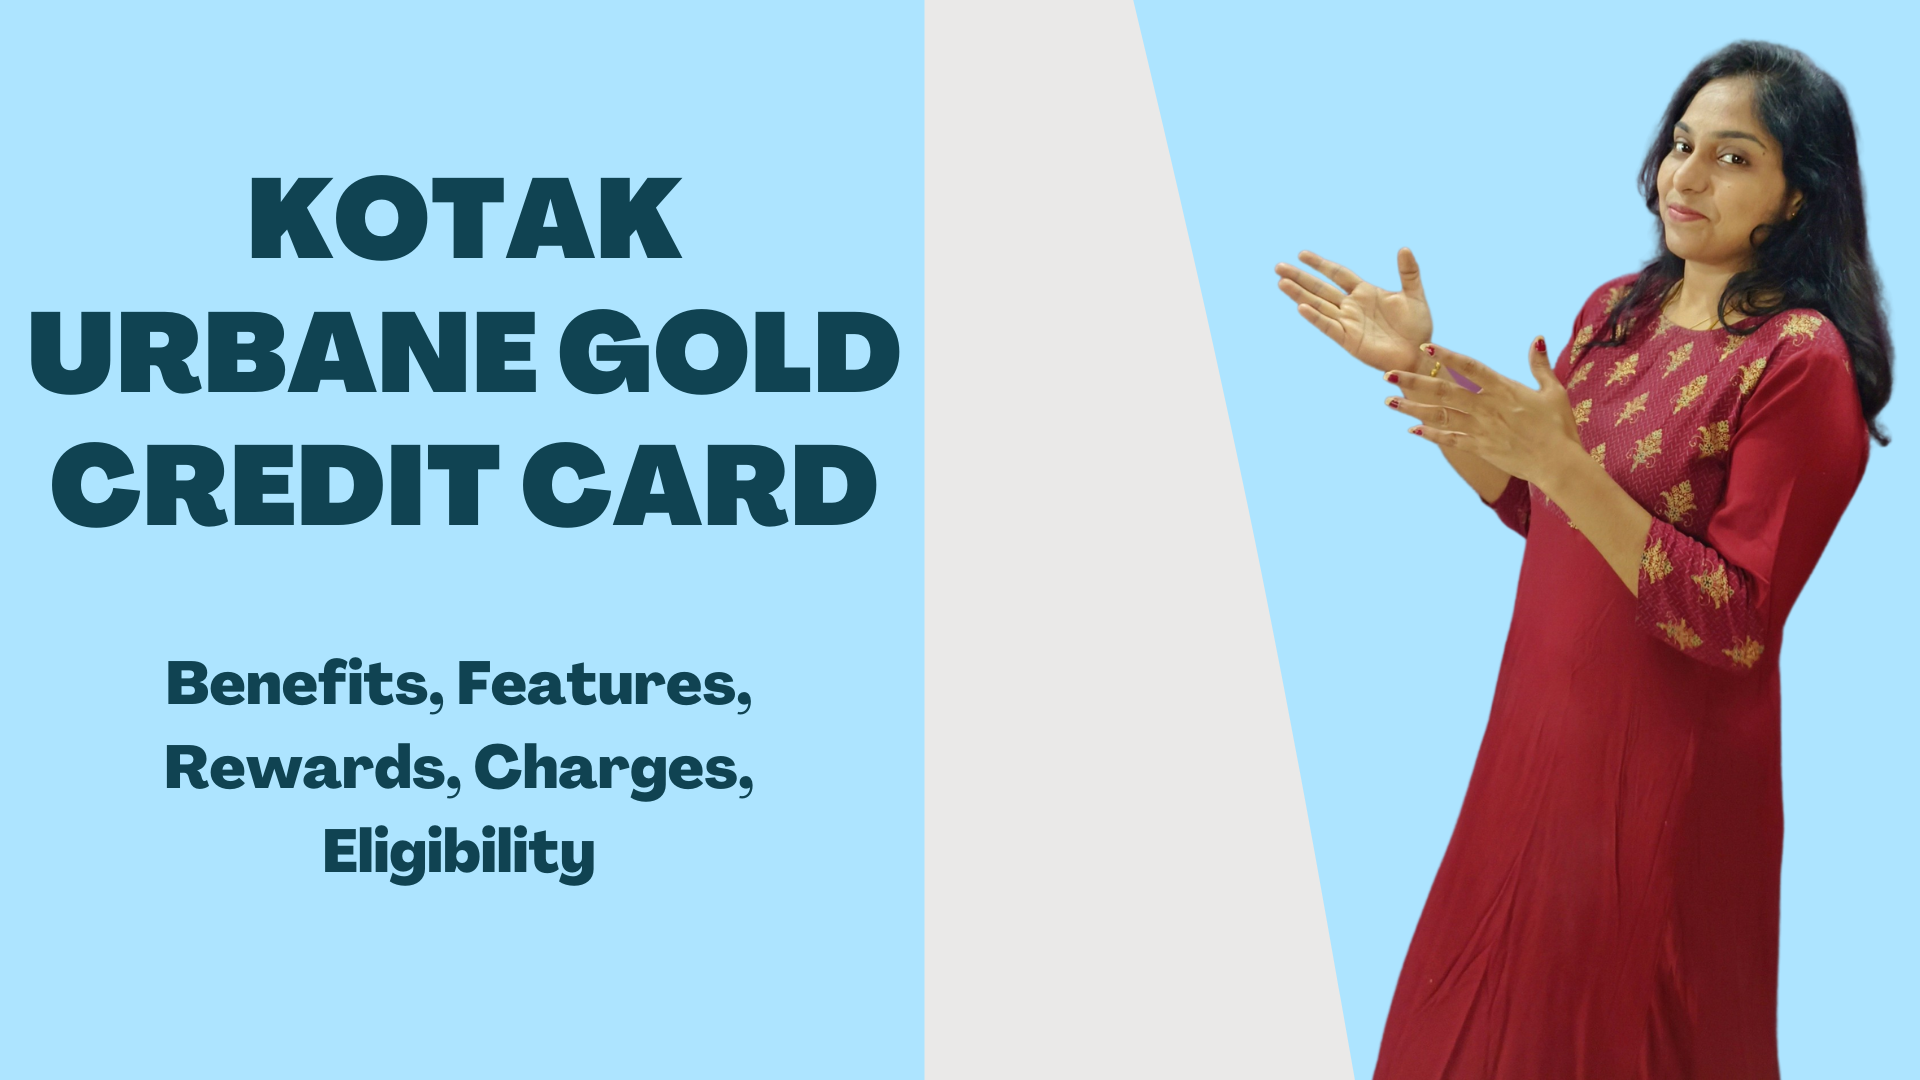 Kotak Urbane Gold Credit Card | Benefits, Features, Rewards, Charges, Eligibility | Details In Tamil